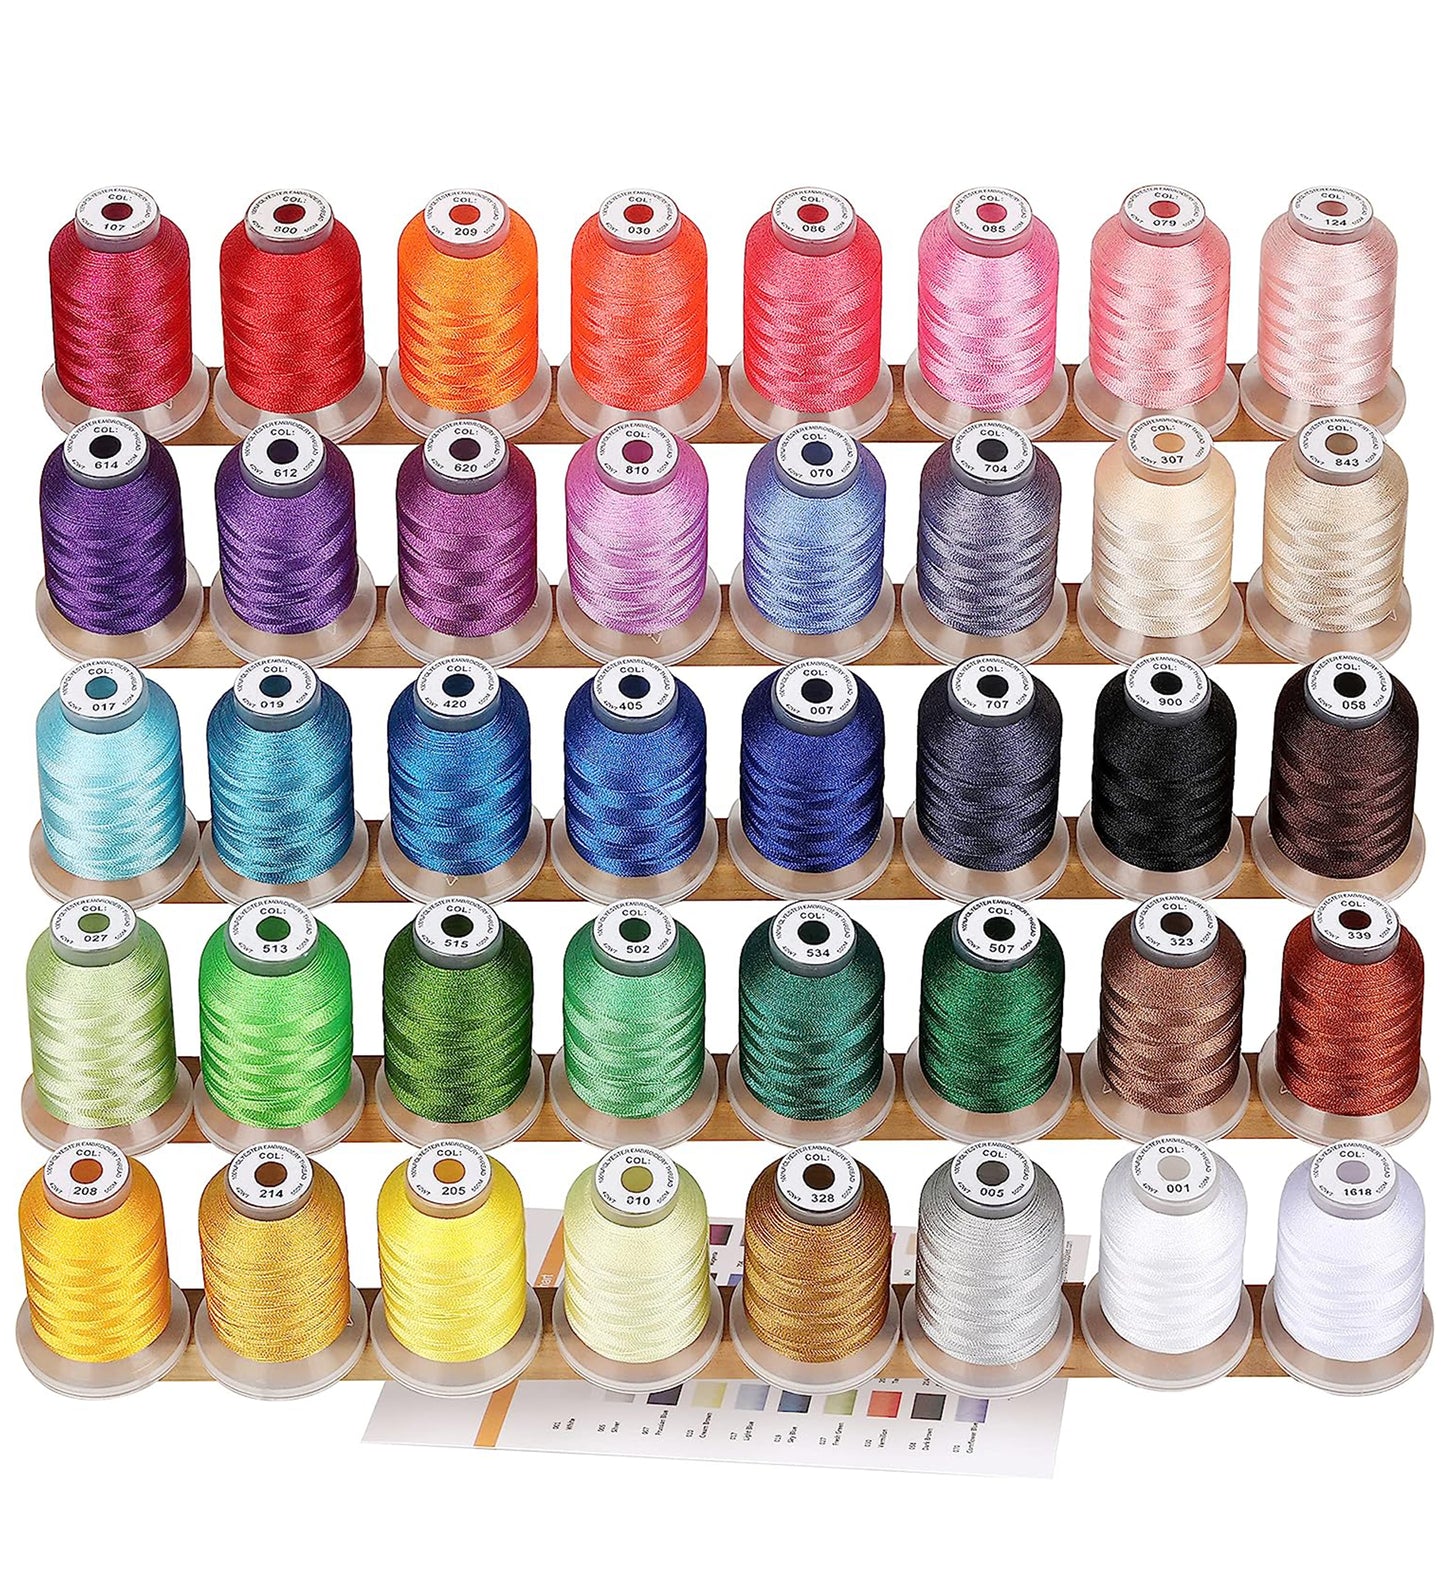 100 Color Polyester Machine Embroidery Thread Kit 500m for Pro and